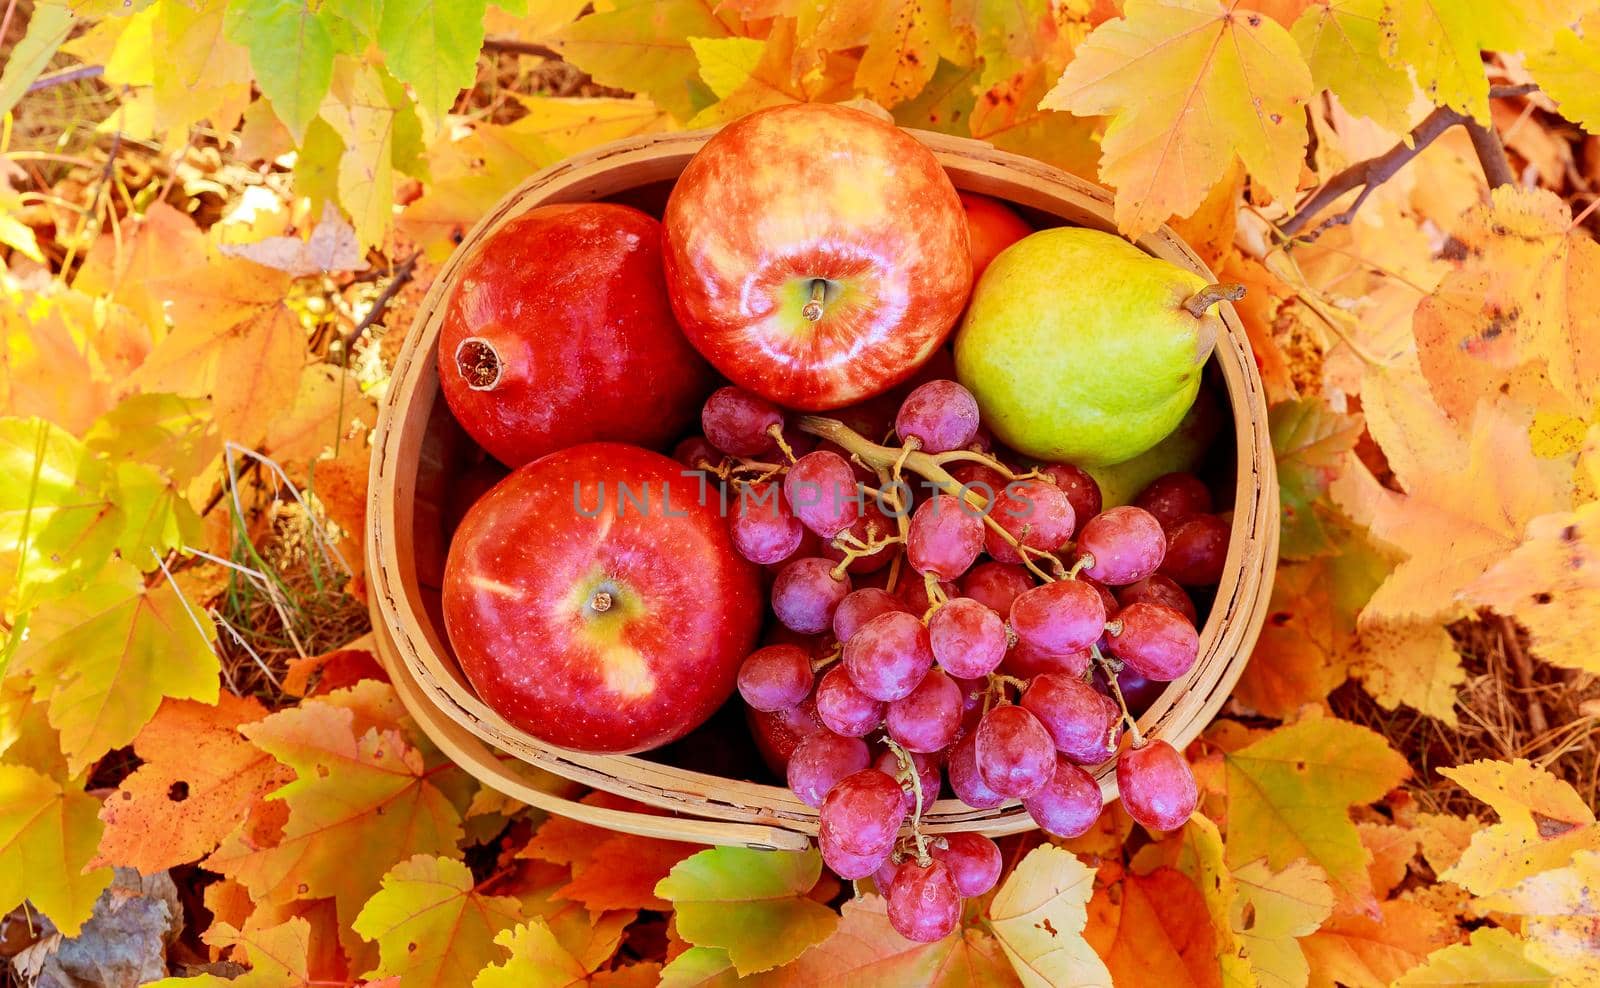 autumn leaves yellow apples grapes grenades basket of apples and grapes on the green grass